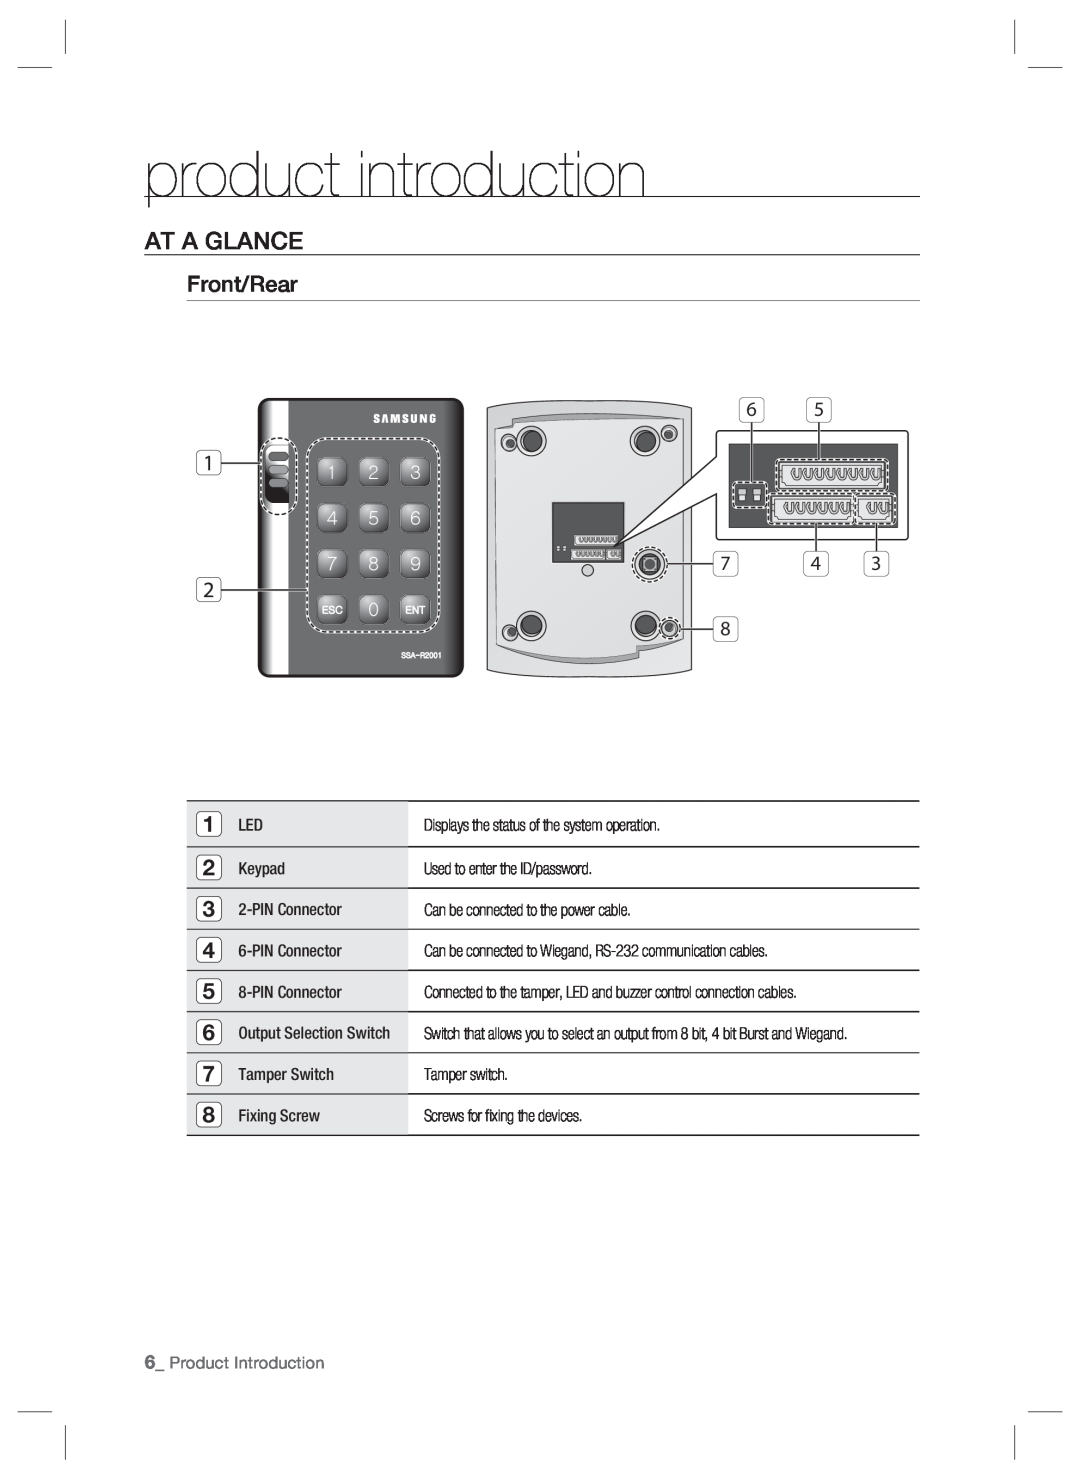 Samsung SSA-R2001 user manual At A Glance, Front/Rear, product introduction, X Y Z \ `, Product Introduction 